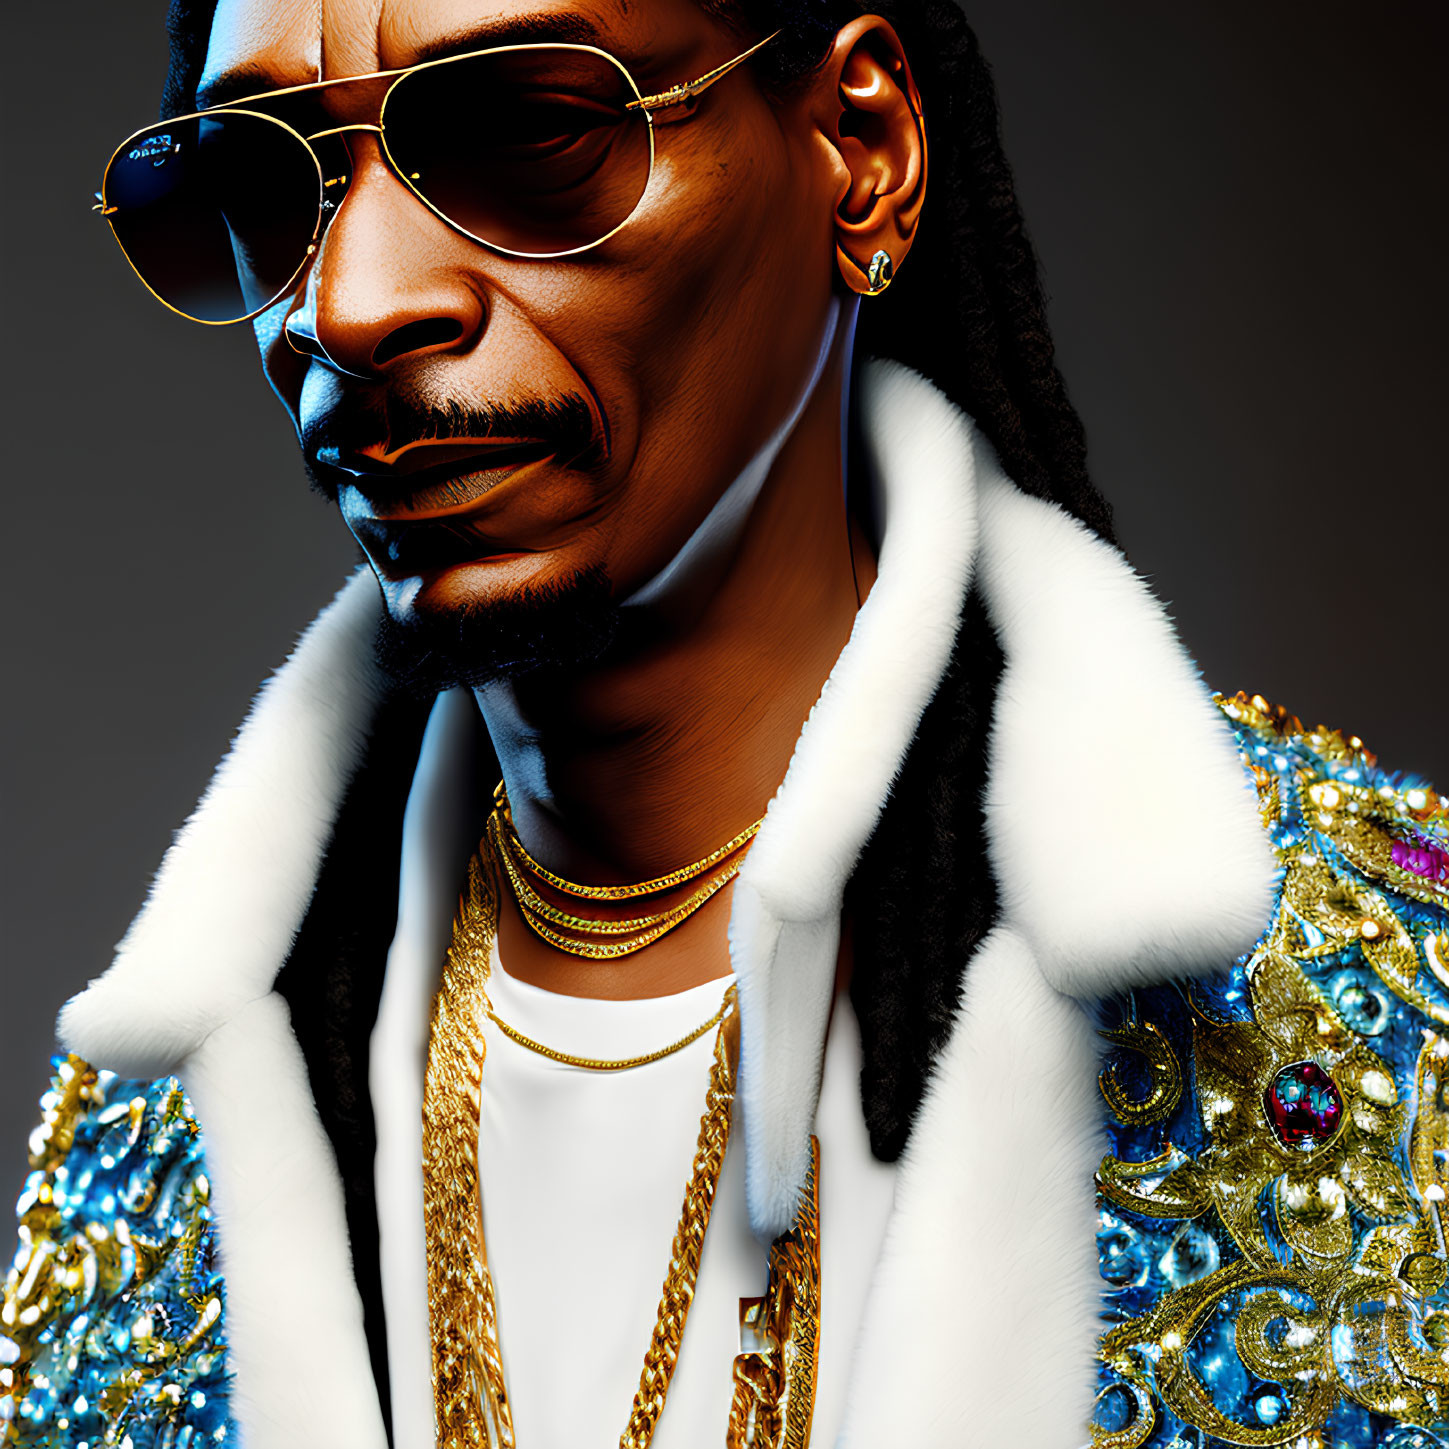 Fashionable man in sunglasses, gold jewelry, sequined jacket with white fur collar